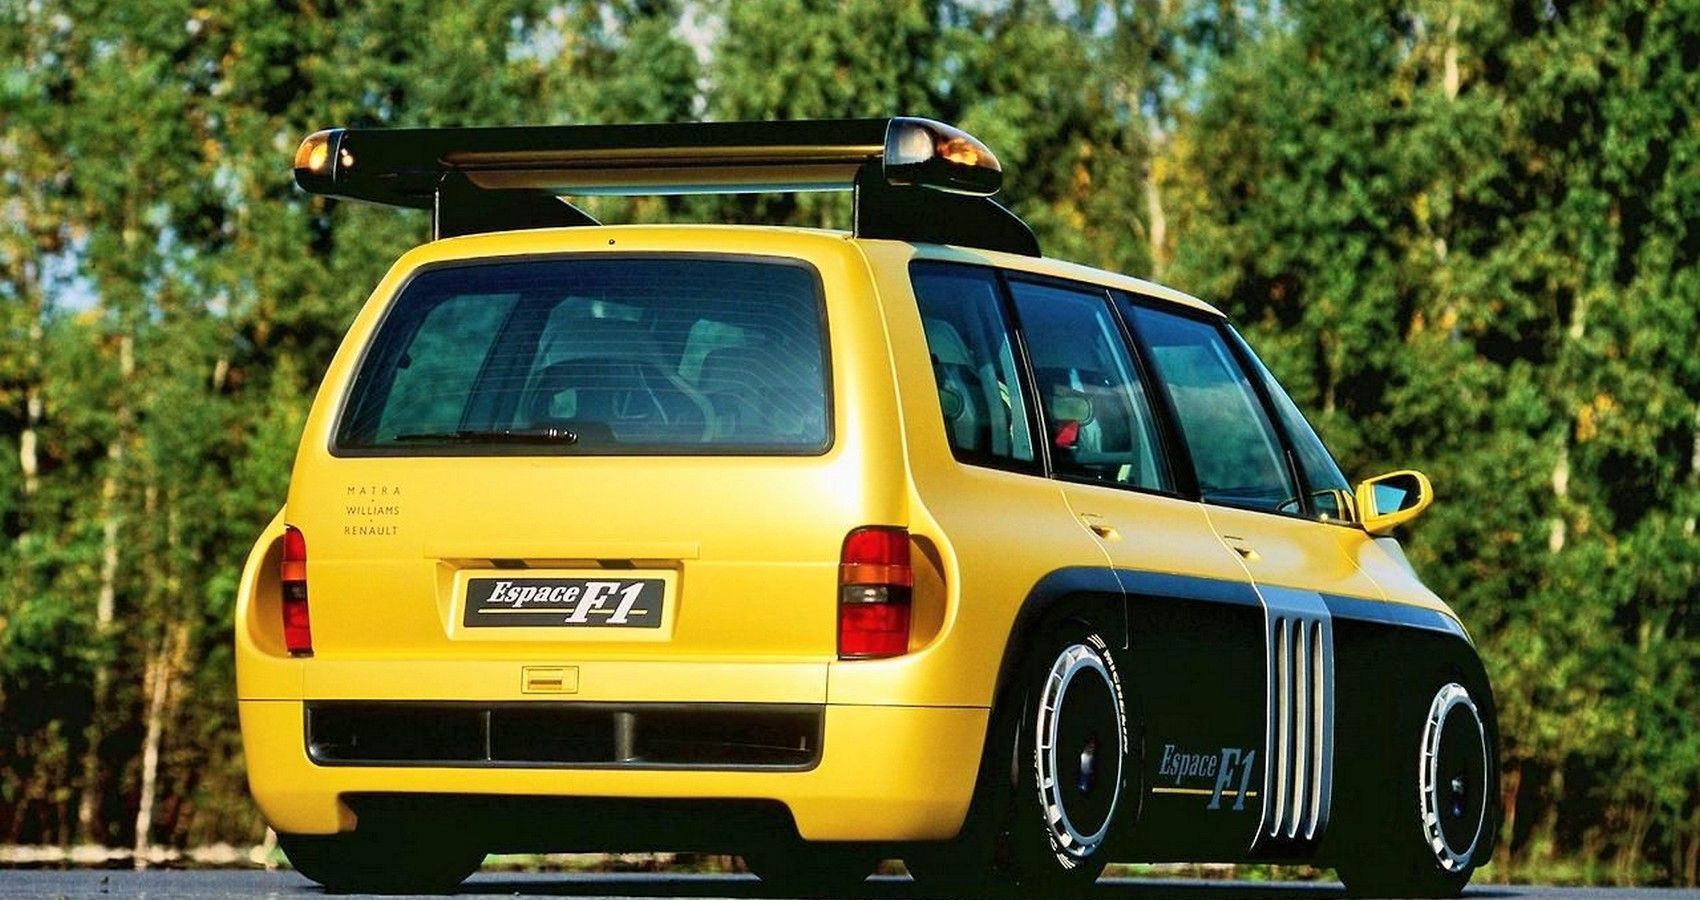 Renault Espace F1 - Rear View